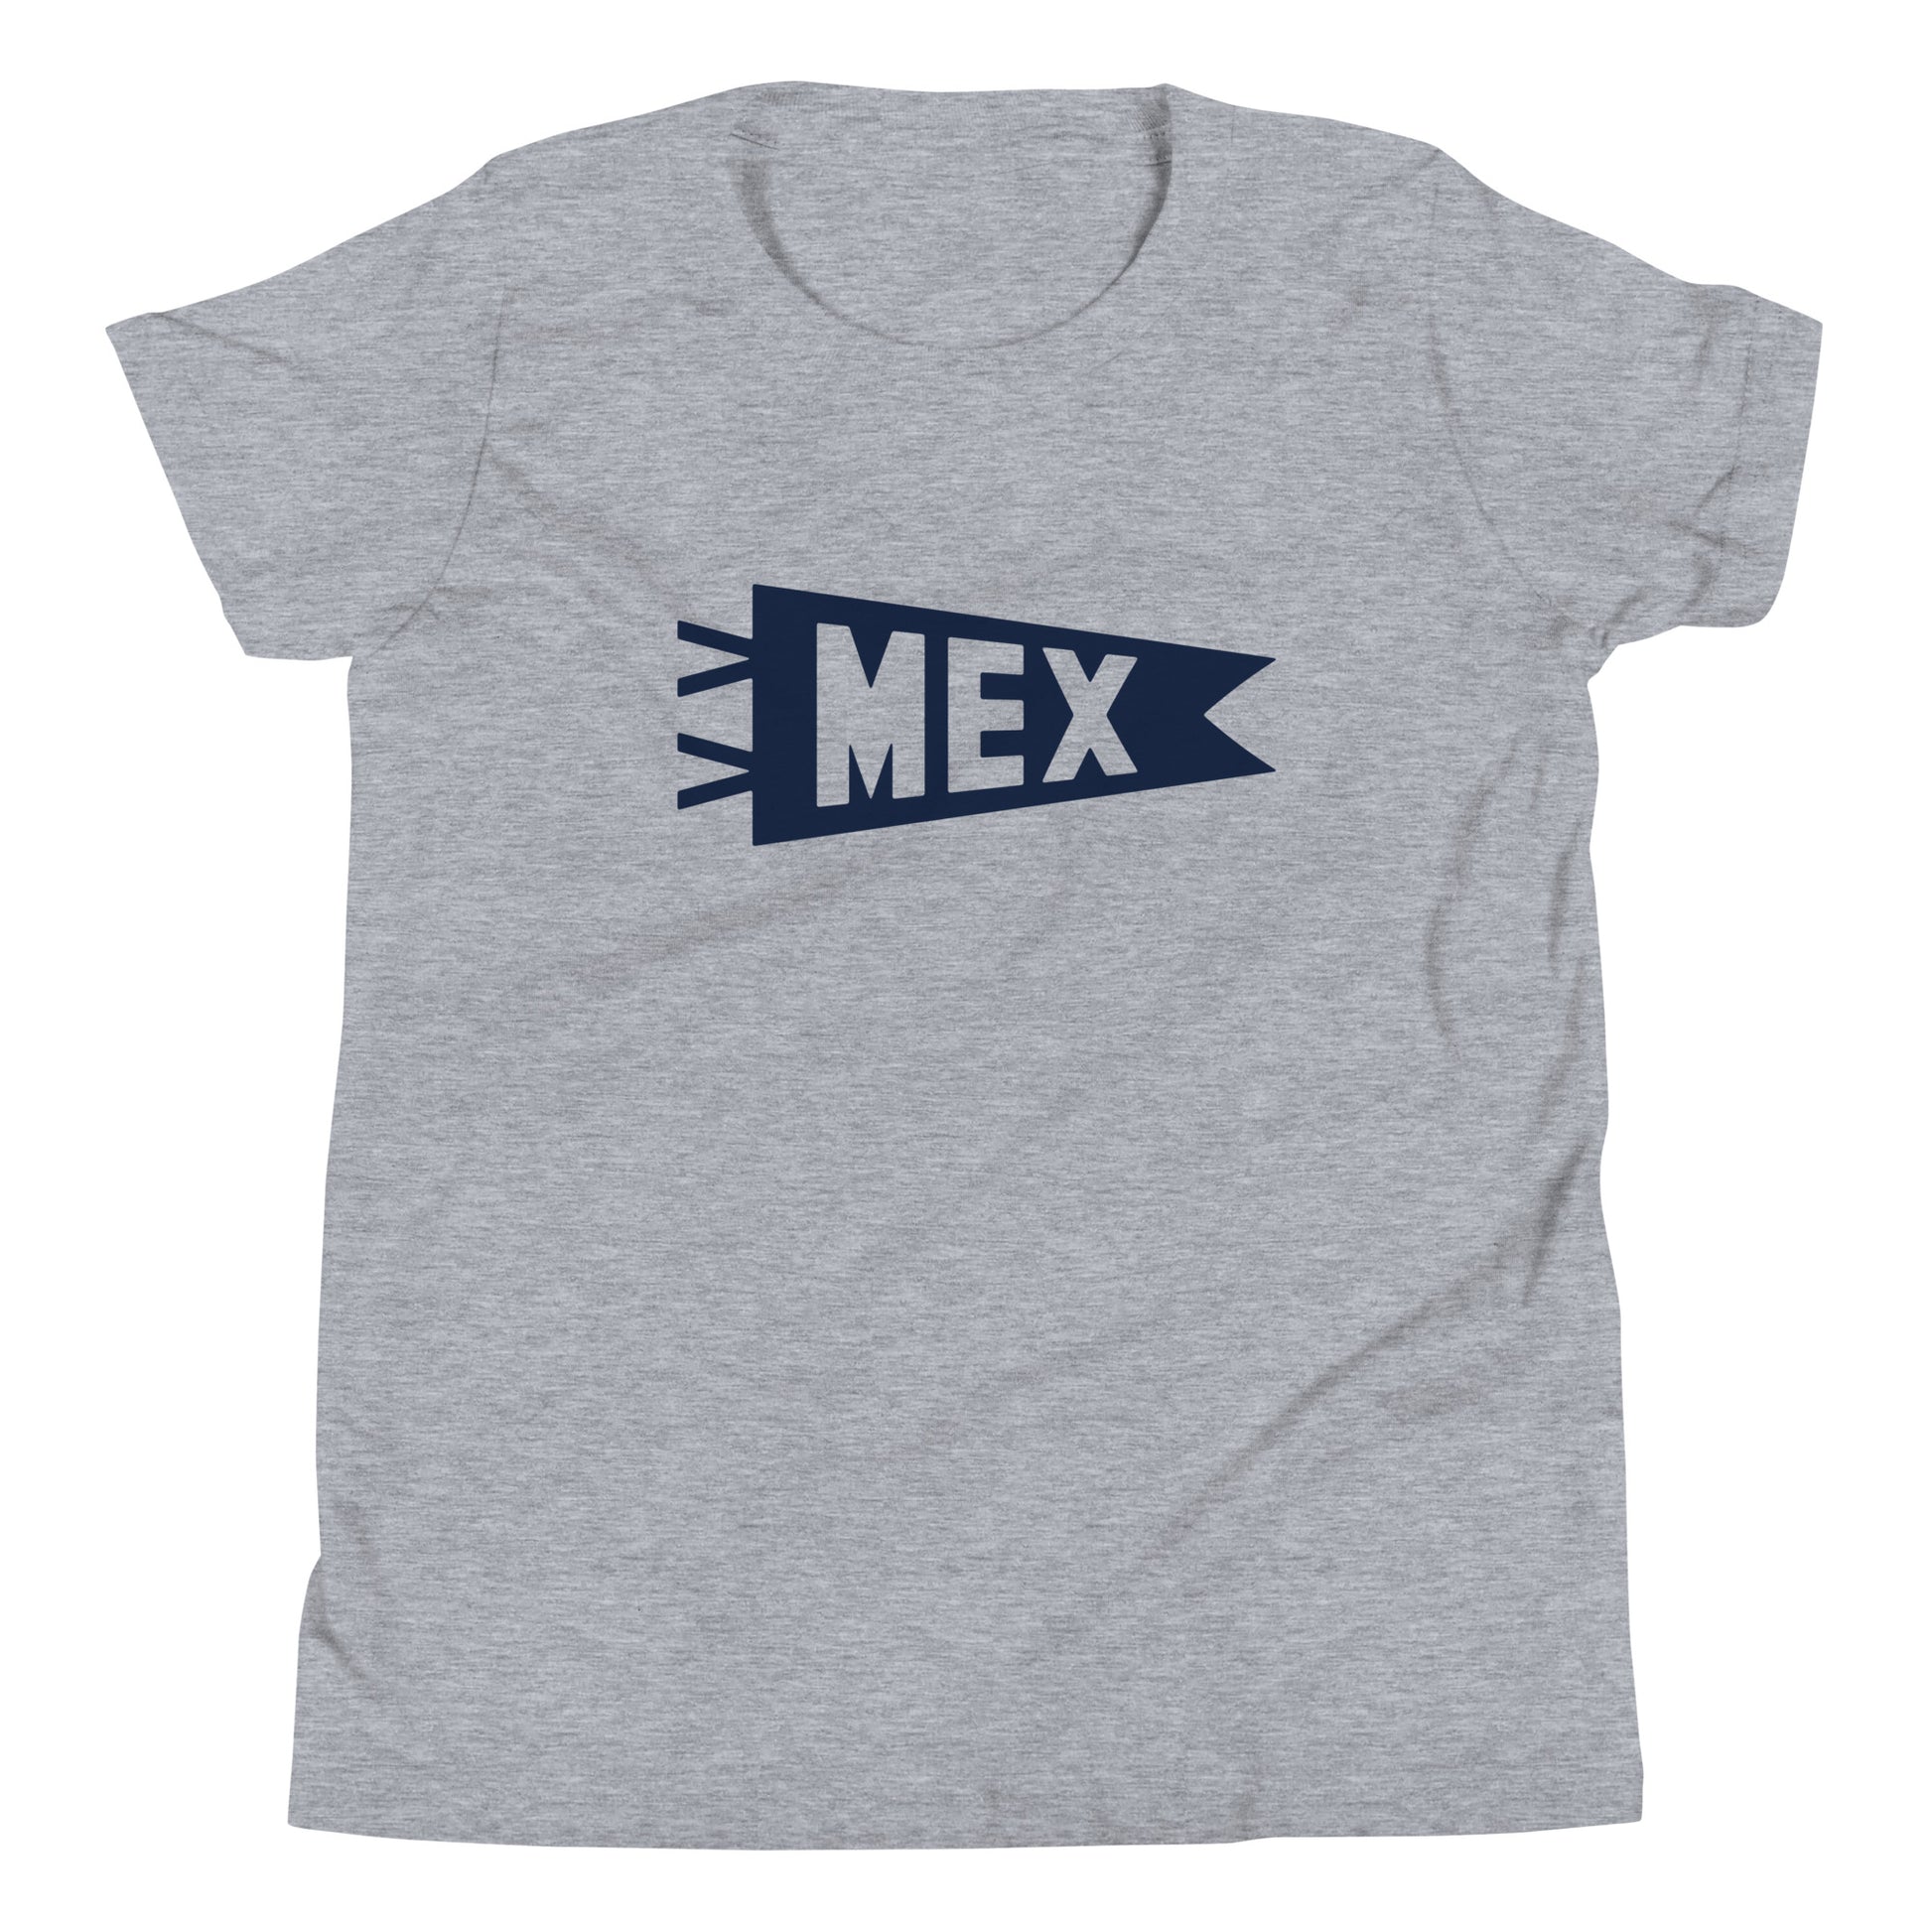 Kid's Airport Code Tee - Navy Blue Graphic • MEX Mexico City • YHM Designs - Image 01